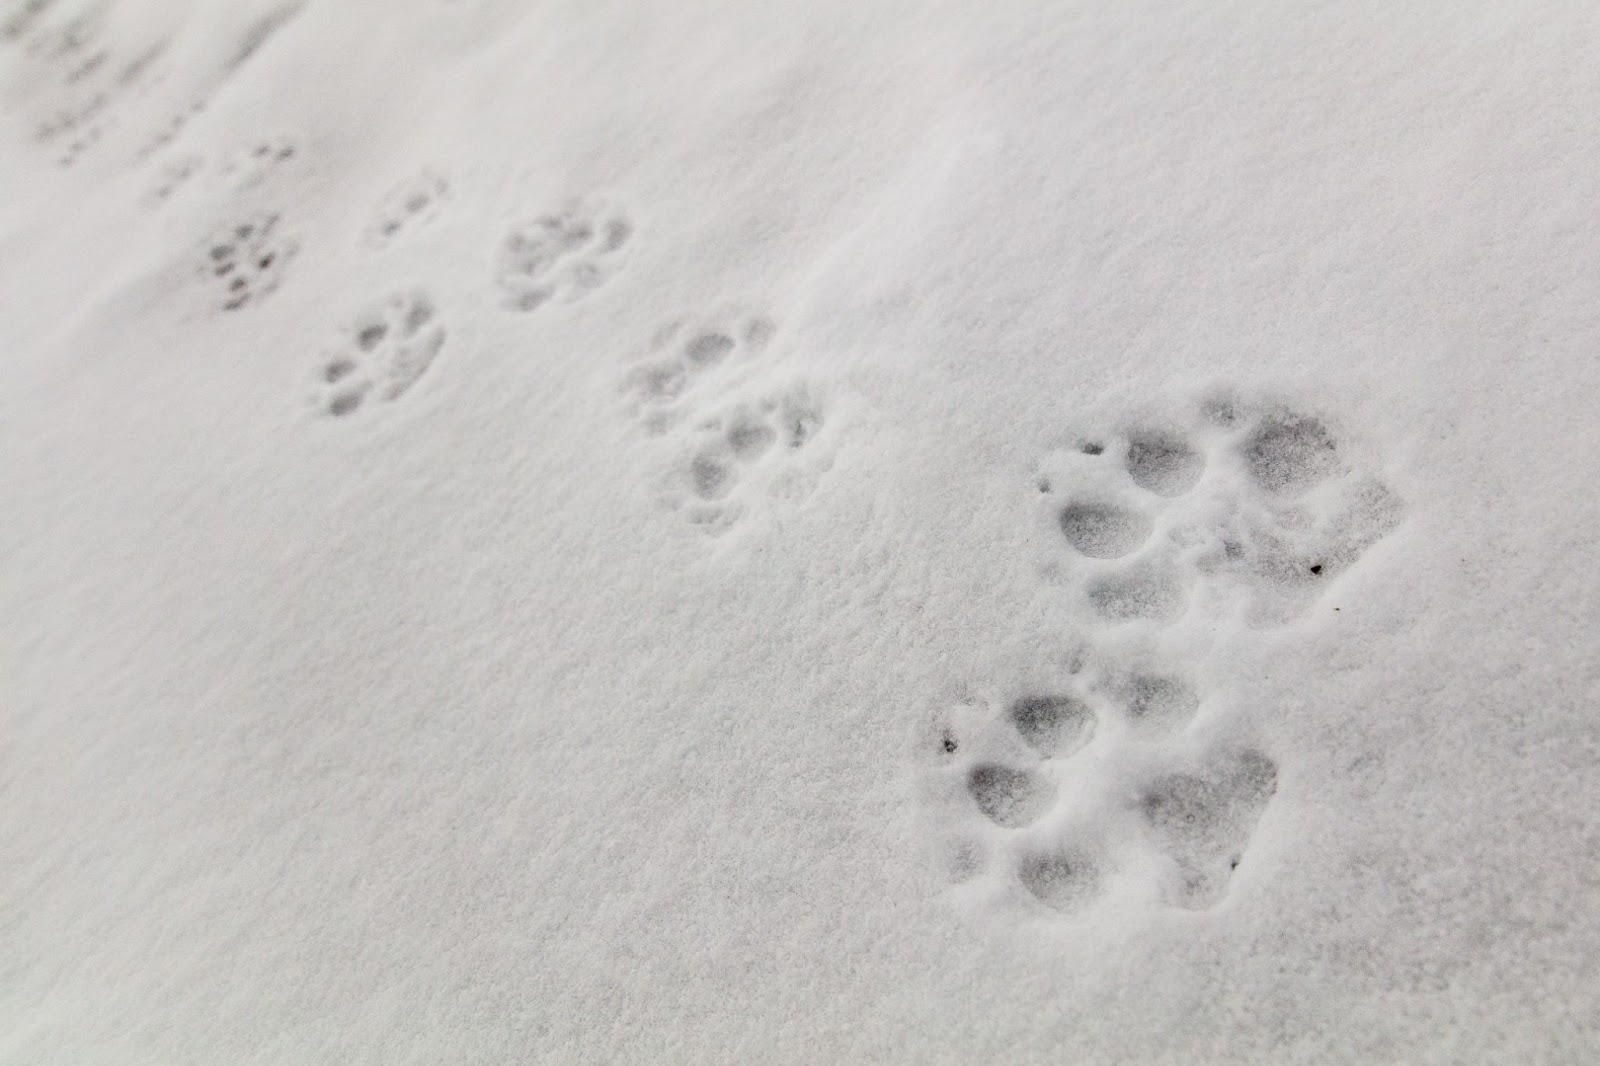 Wolf tracks in the snow.